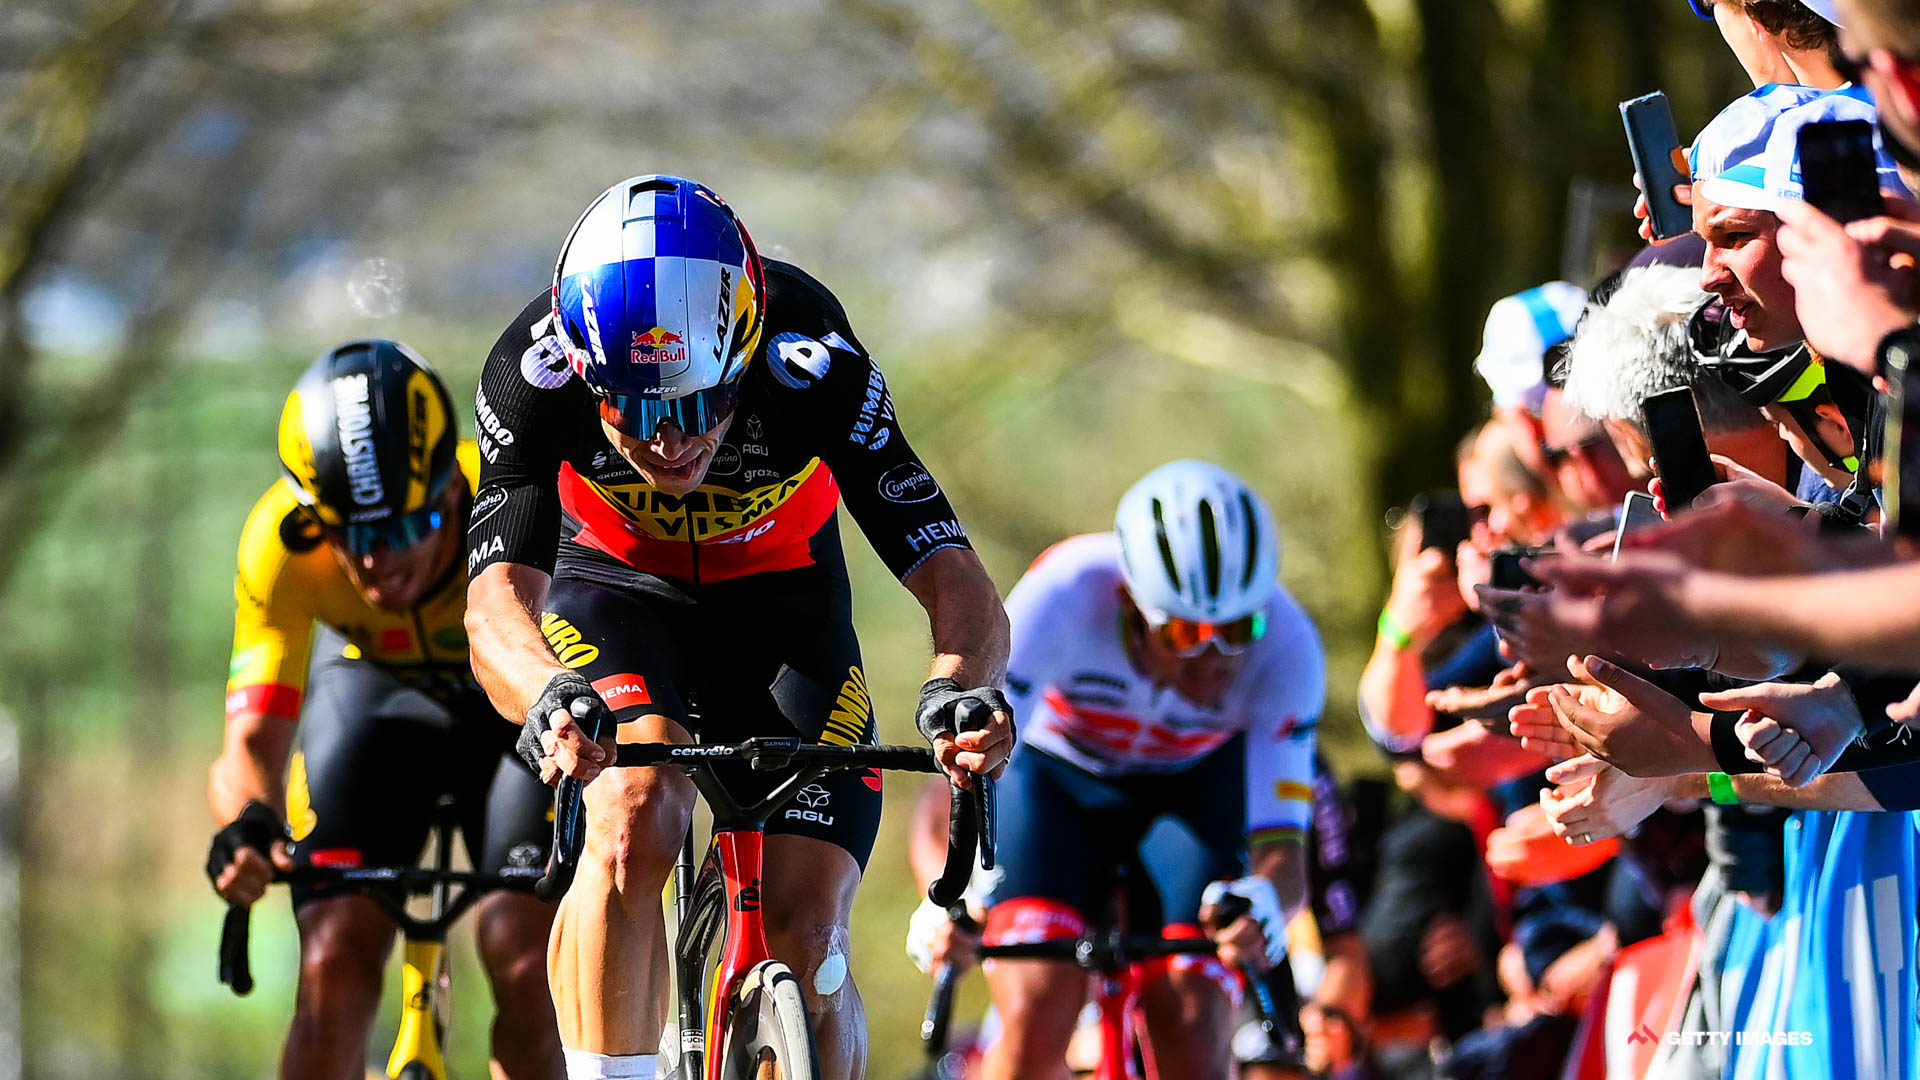 Why is Wout van Aert allowed to race in a Red Bull helmet on the road?